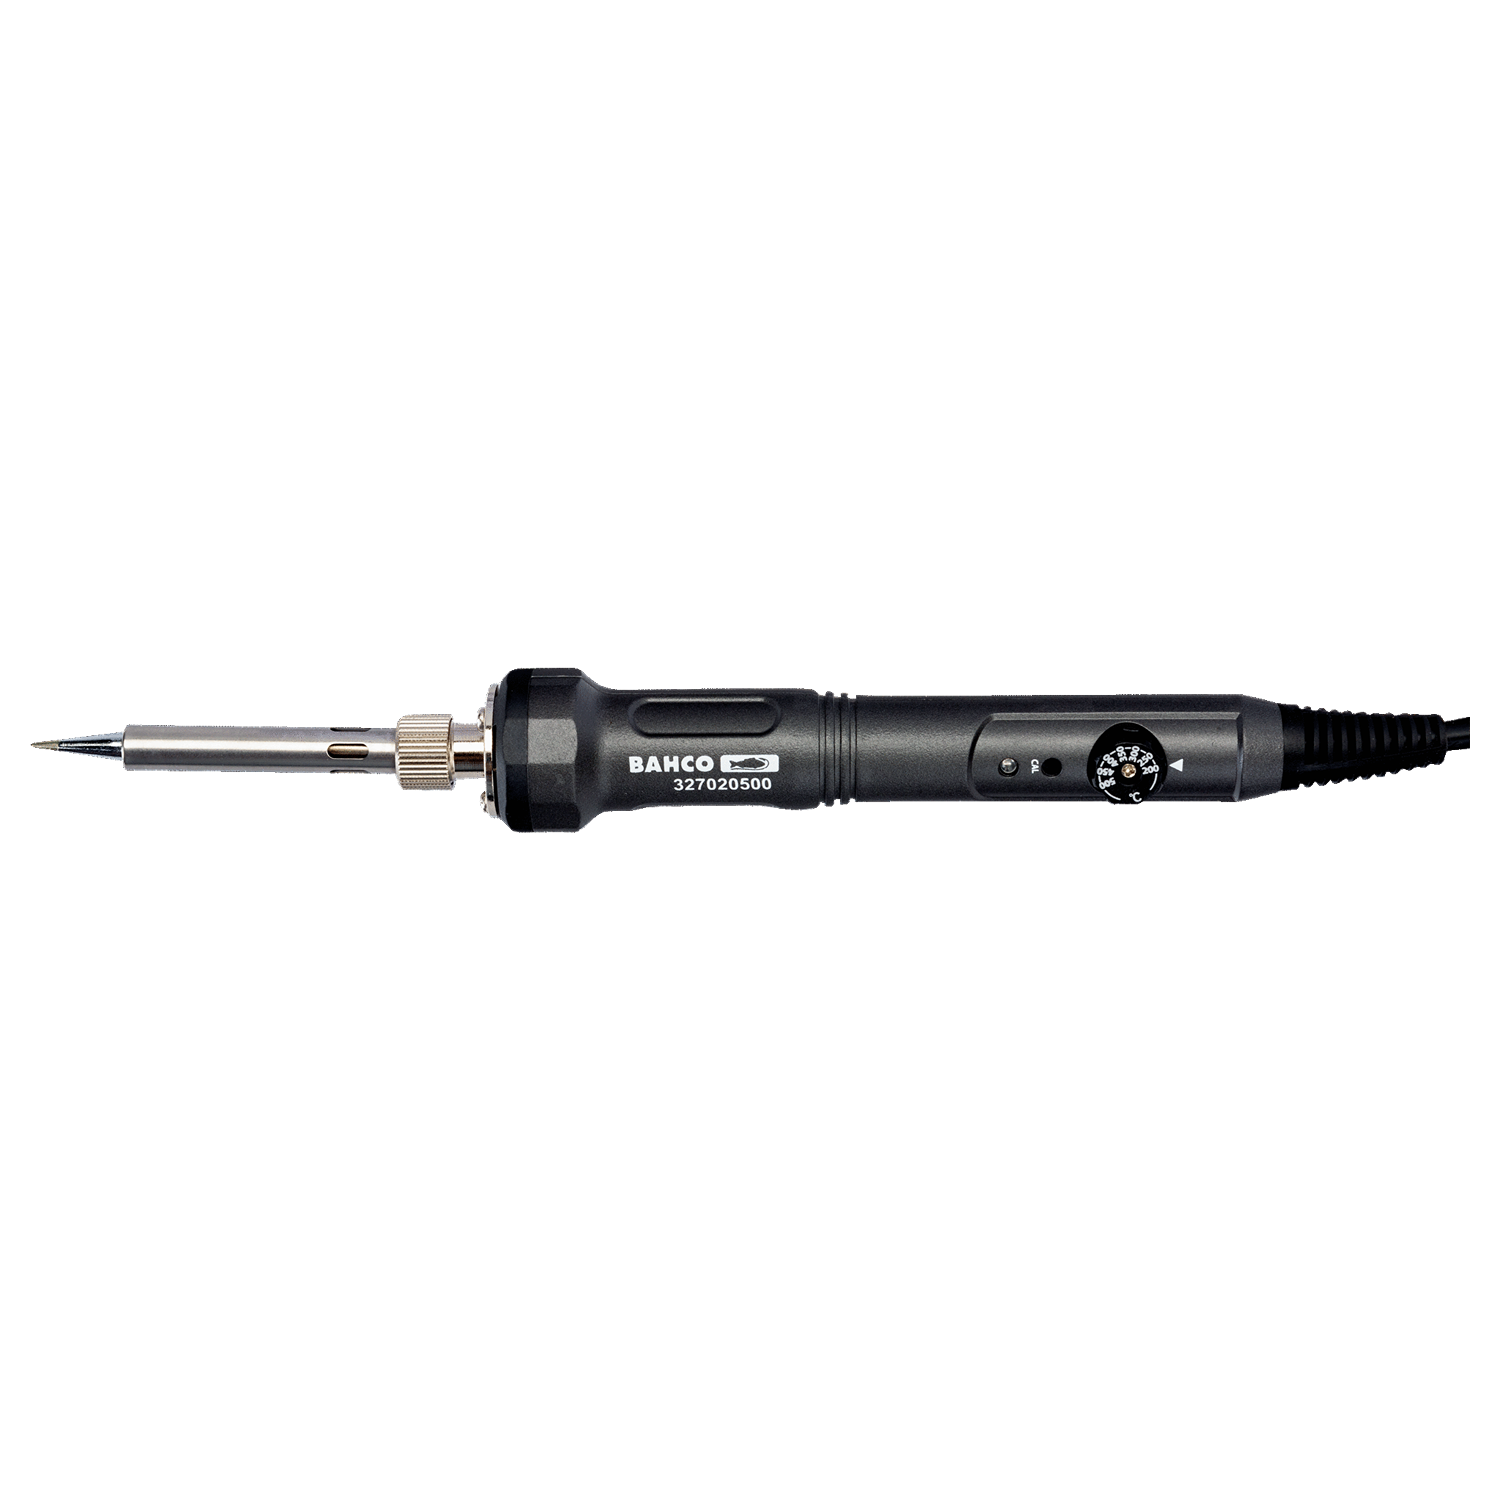 BAHCO 3270 Temperature Controlled Soldering Tools Irons - 50 W - Premium Soldering Tools from BAHCO - Shop now at Yew Aik.